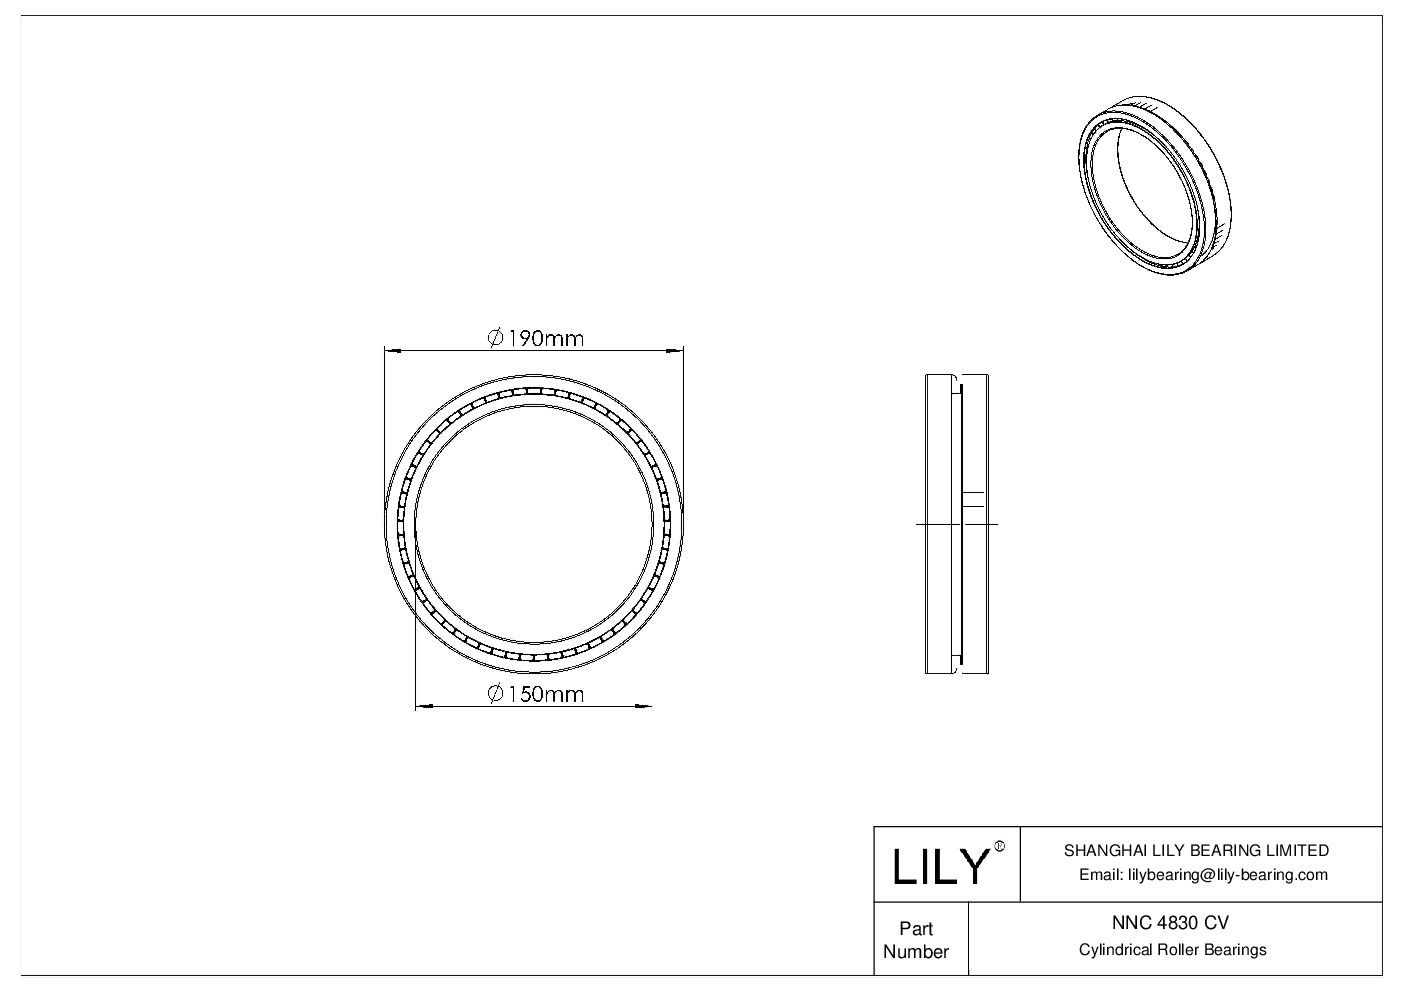 NNC 4830 CV Double Row Full Complement Cylindrical Roller Bearings cad drawing